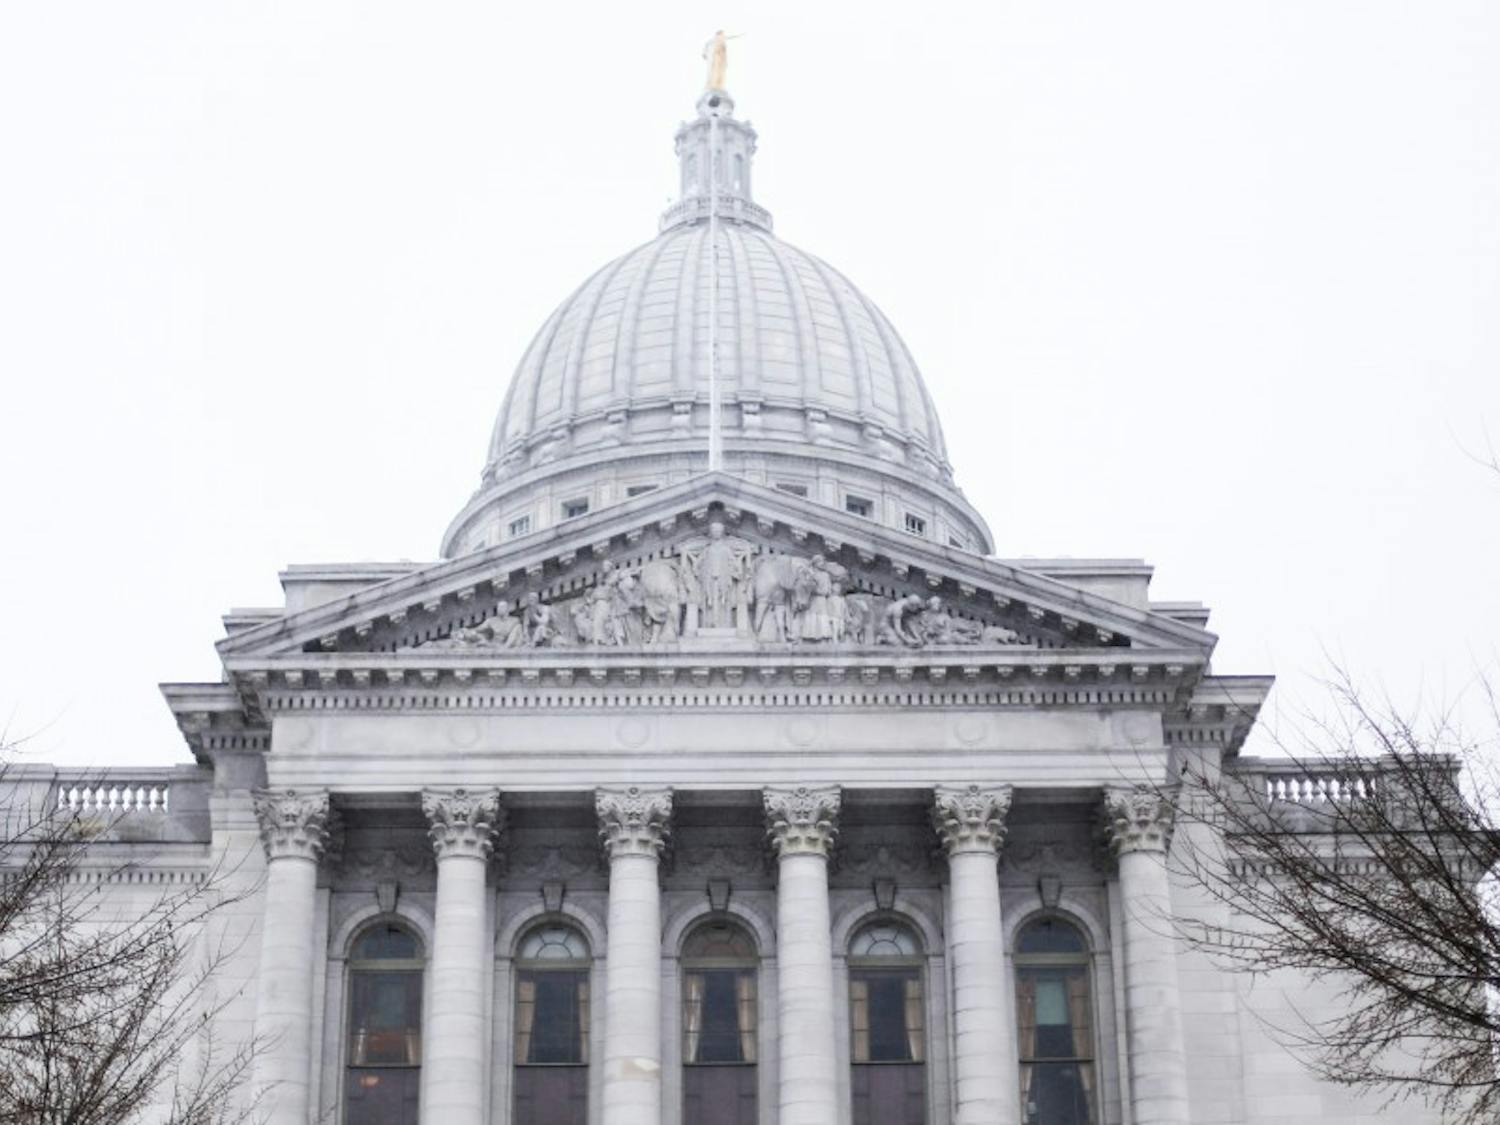 The state Senate voted Friday night to approve the state budget, the final hurdle before the document is ready for Gov. Scott Walker's signature